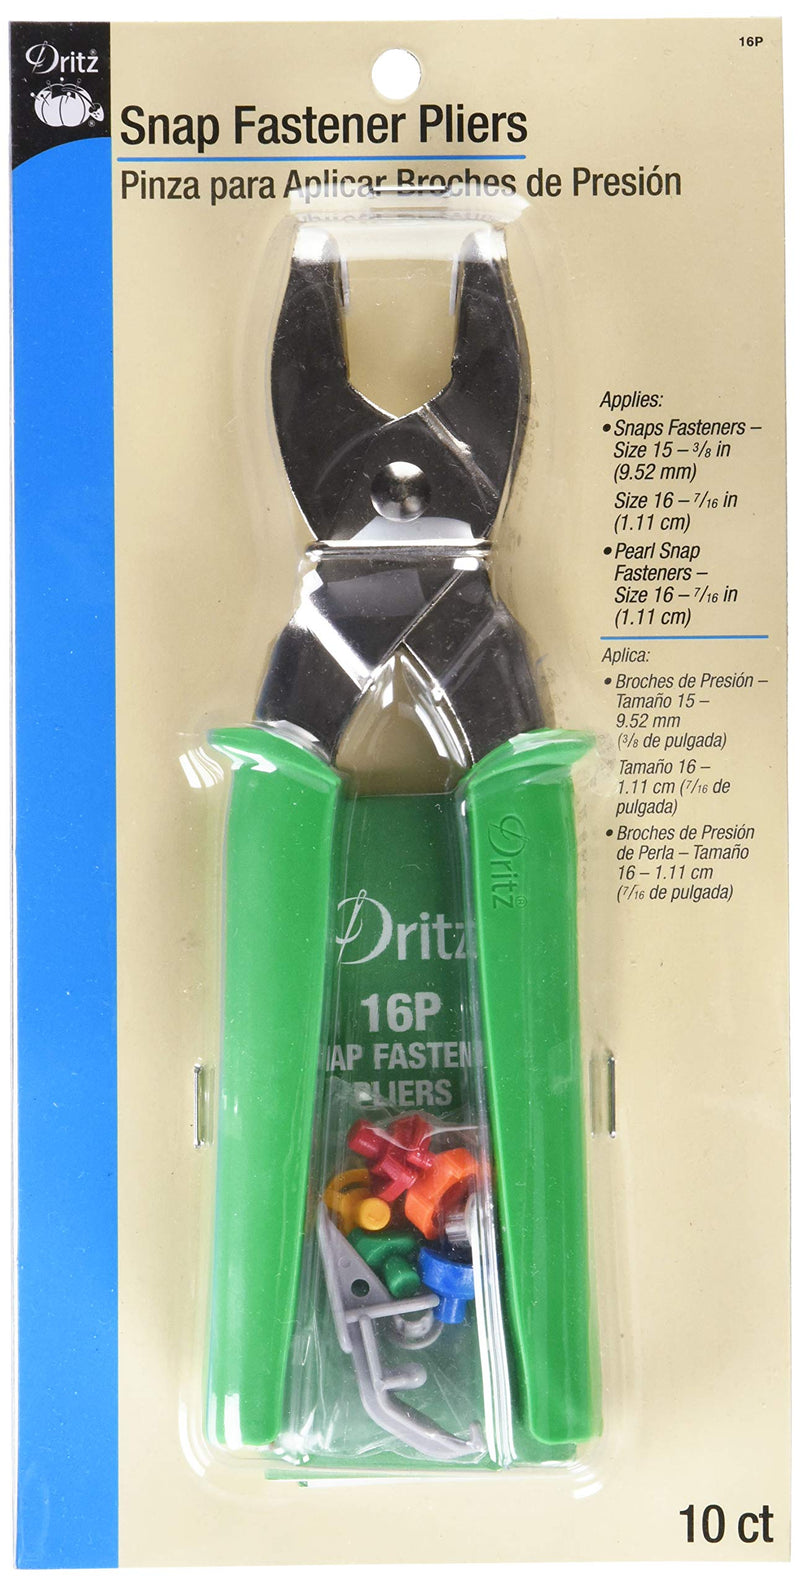 Dritz 16P Snap Fastener Pliers, Size 15 (3/8-Inch) & Size 16 (7/16-Inch), Metal Size 15 (3/8-Inch) & Size 16 (7/16-Inch) - NewNest Australia